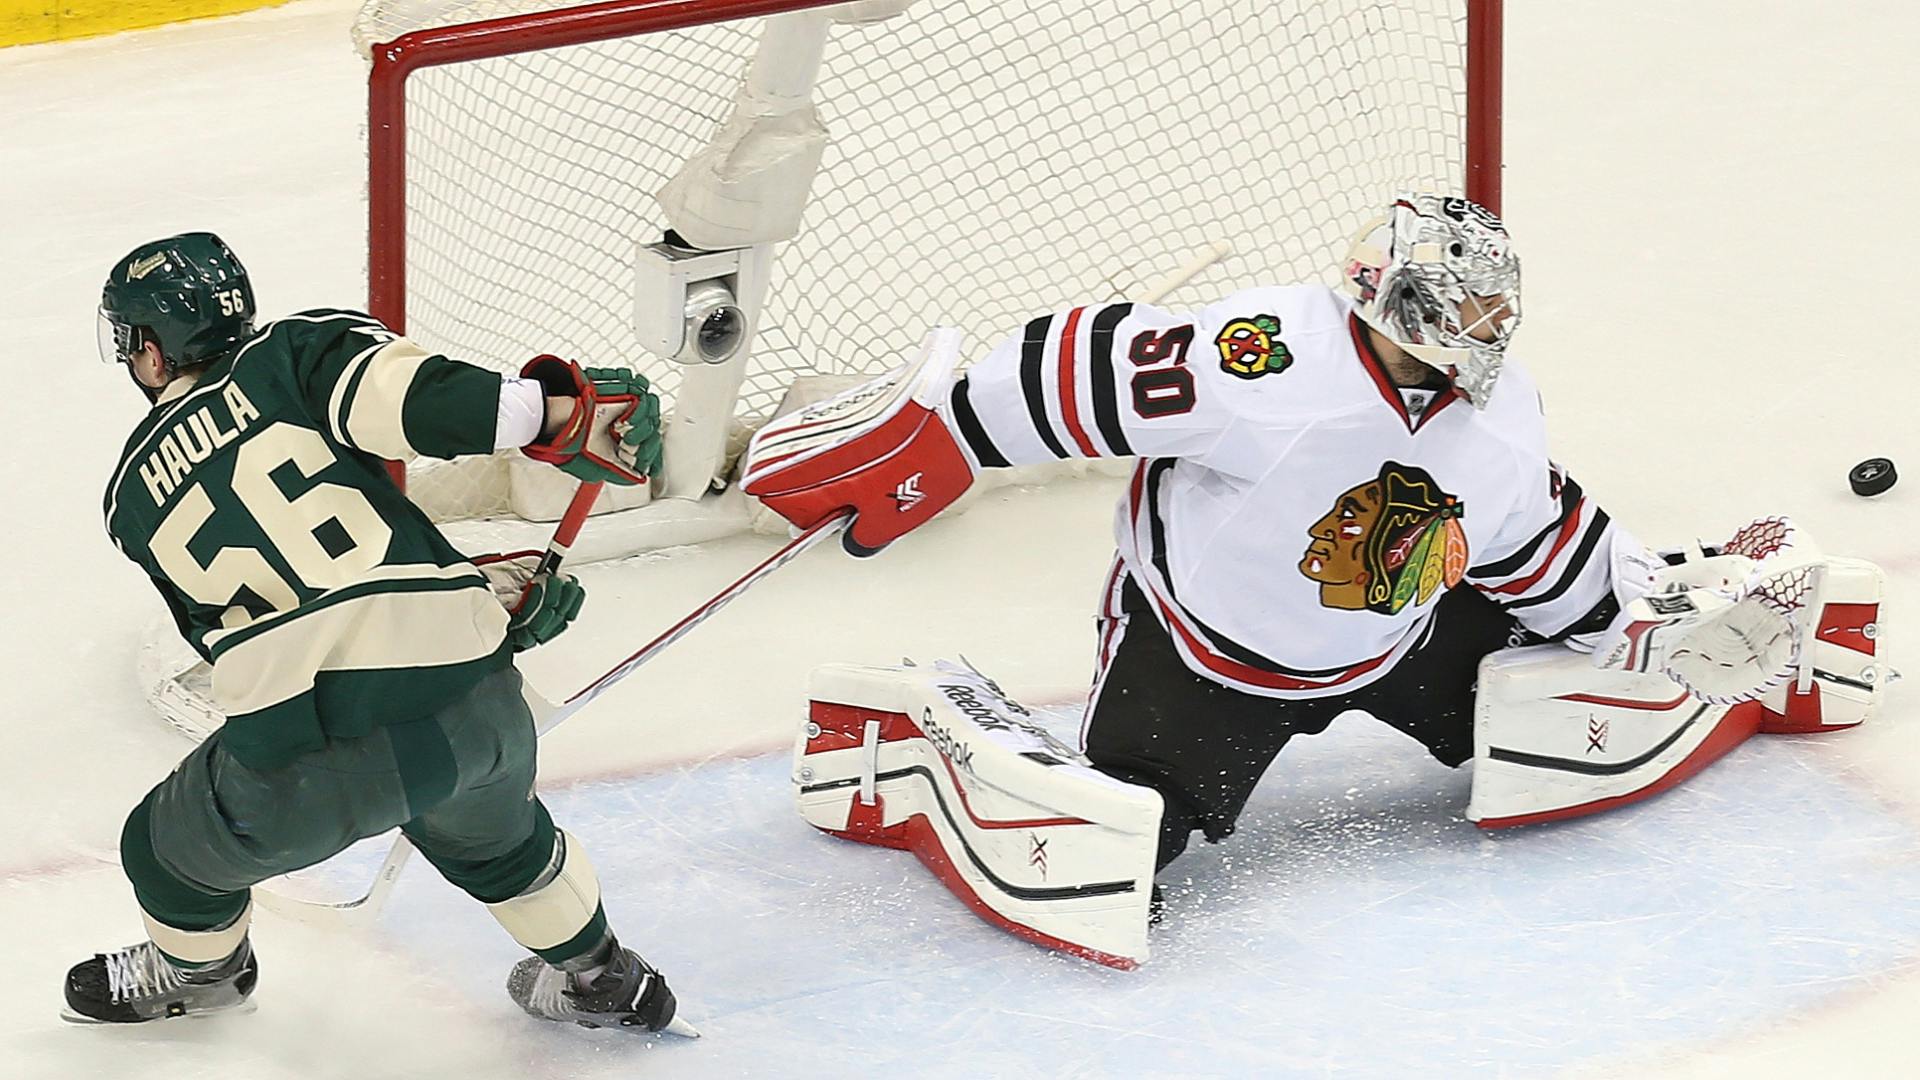 Michael Russo and Michael Rand on what went right for the Wild in Game 3 against Chicago.